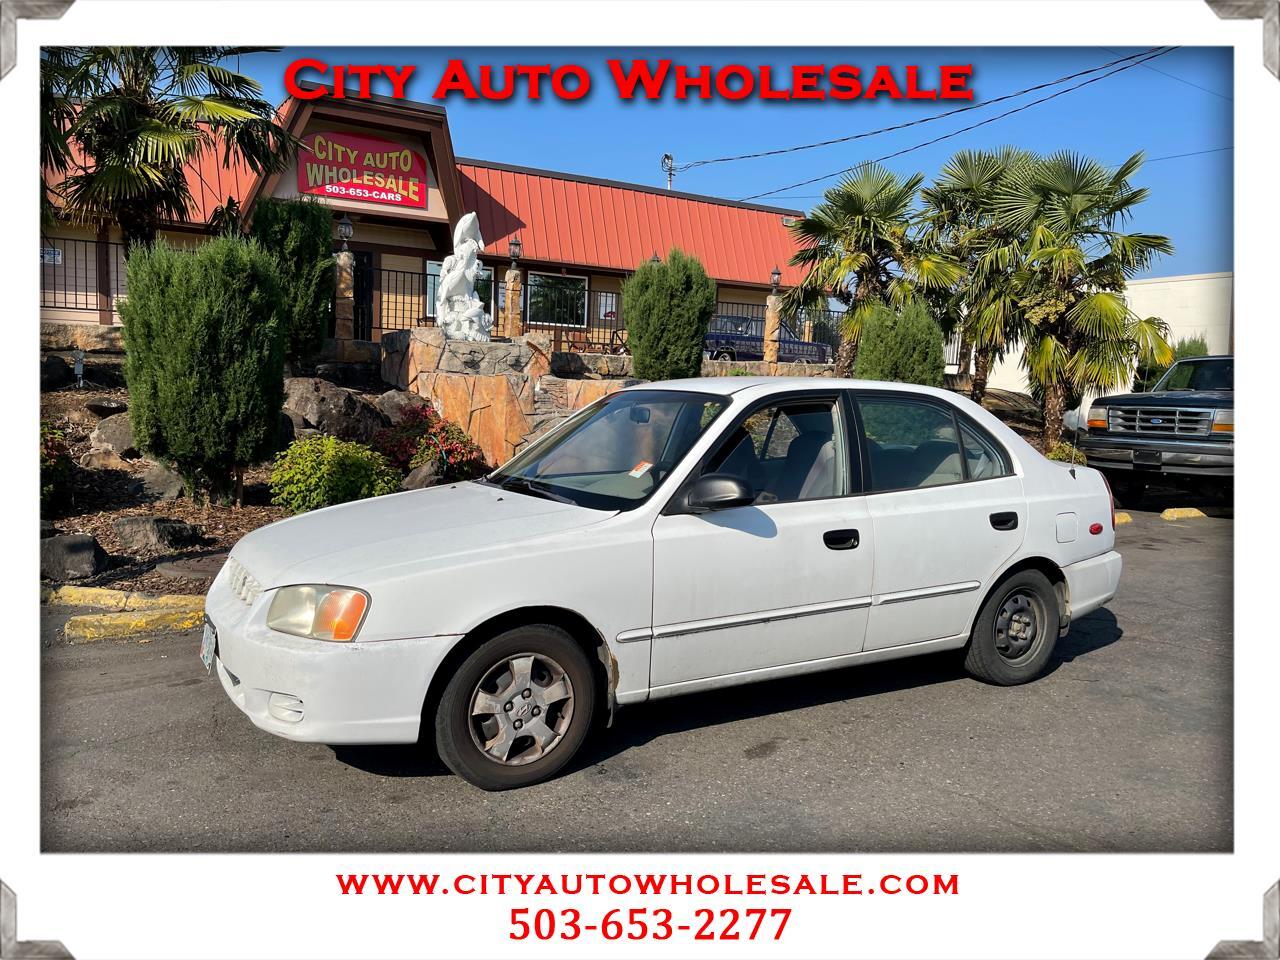 Used 2000 Hyundai Accent GL for Sale in Milwaukie OR 97222 City Auto  Wholesale